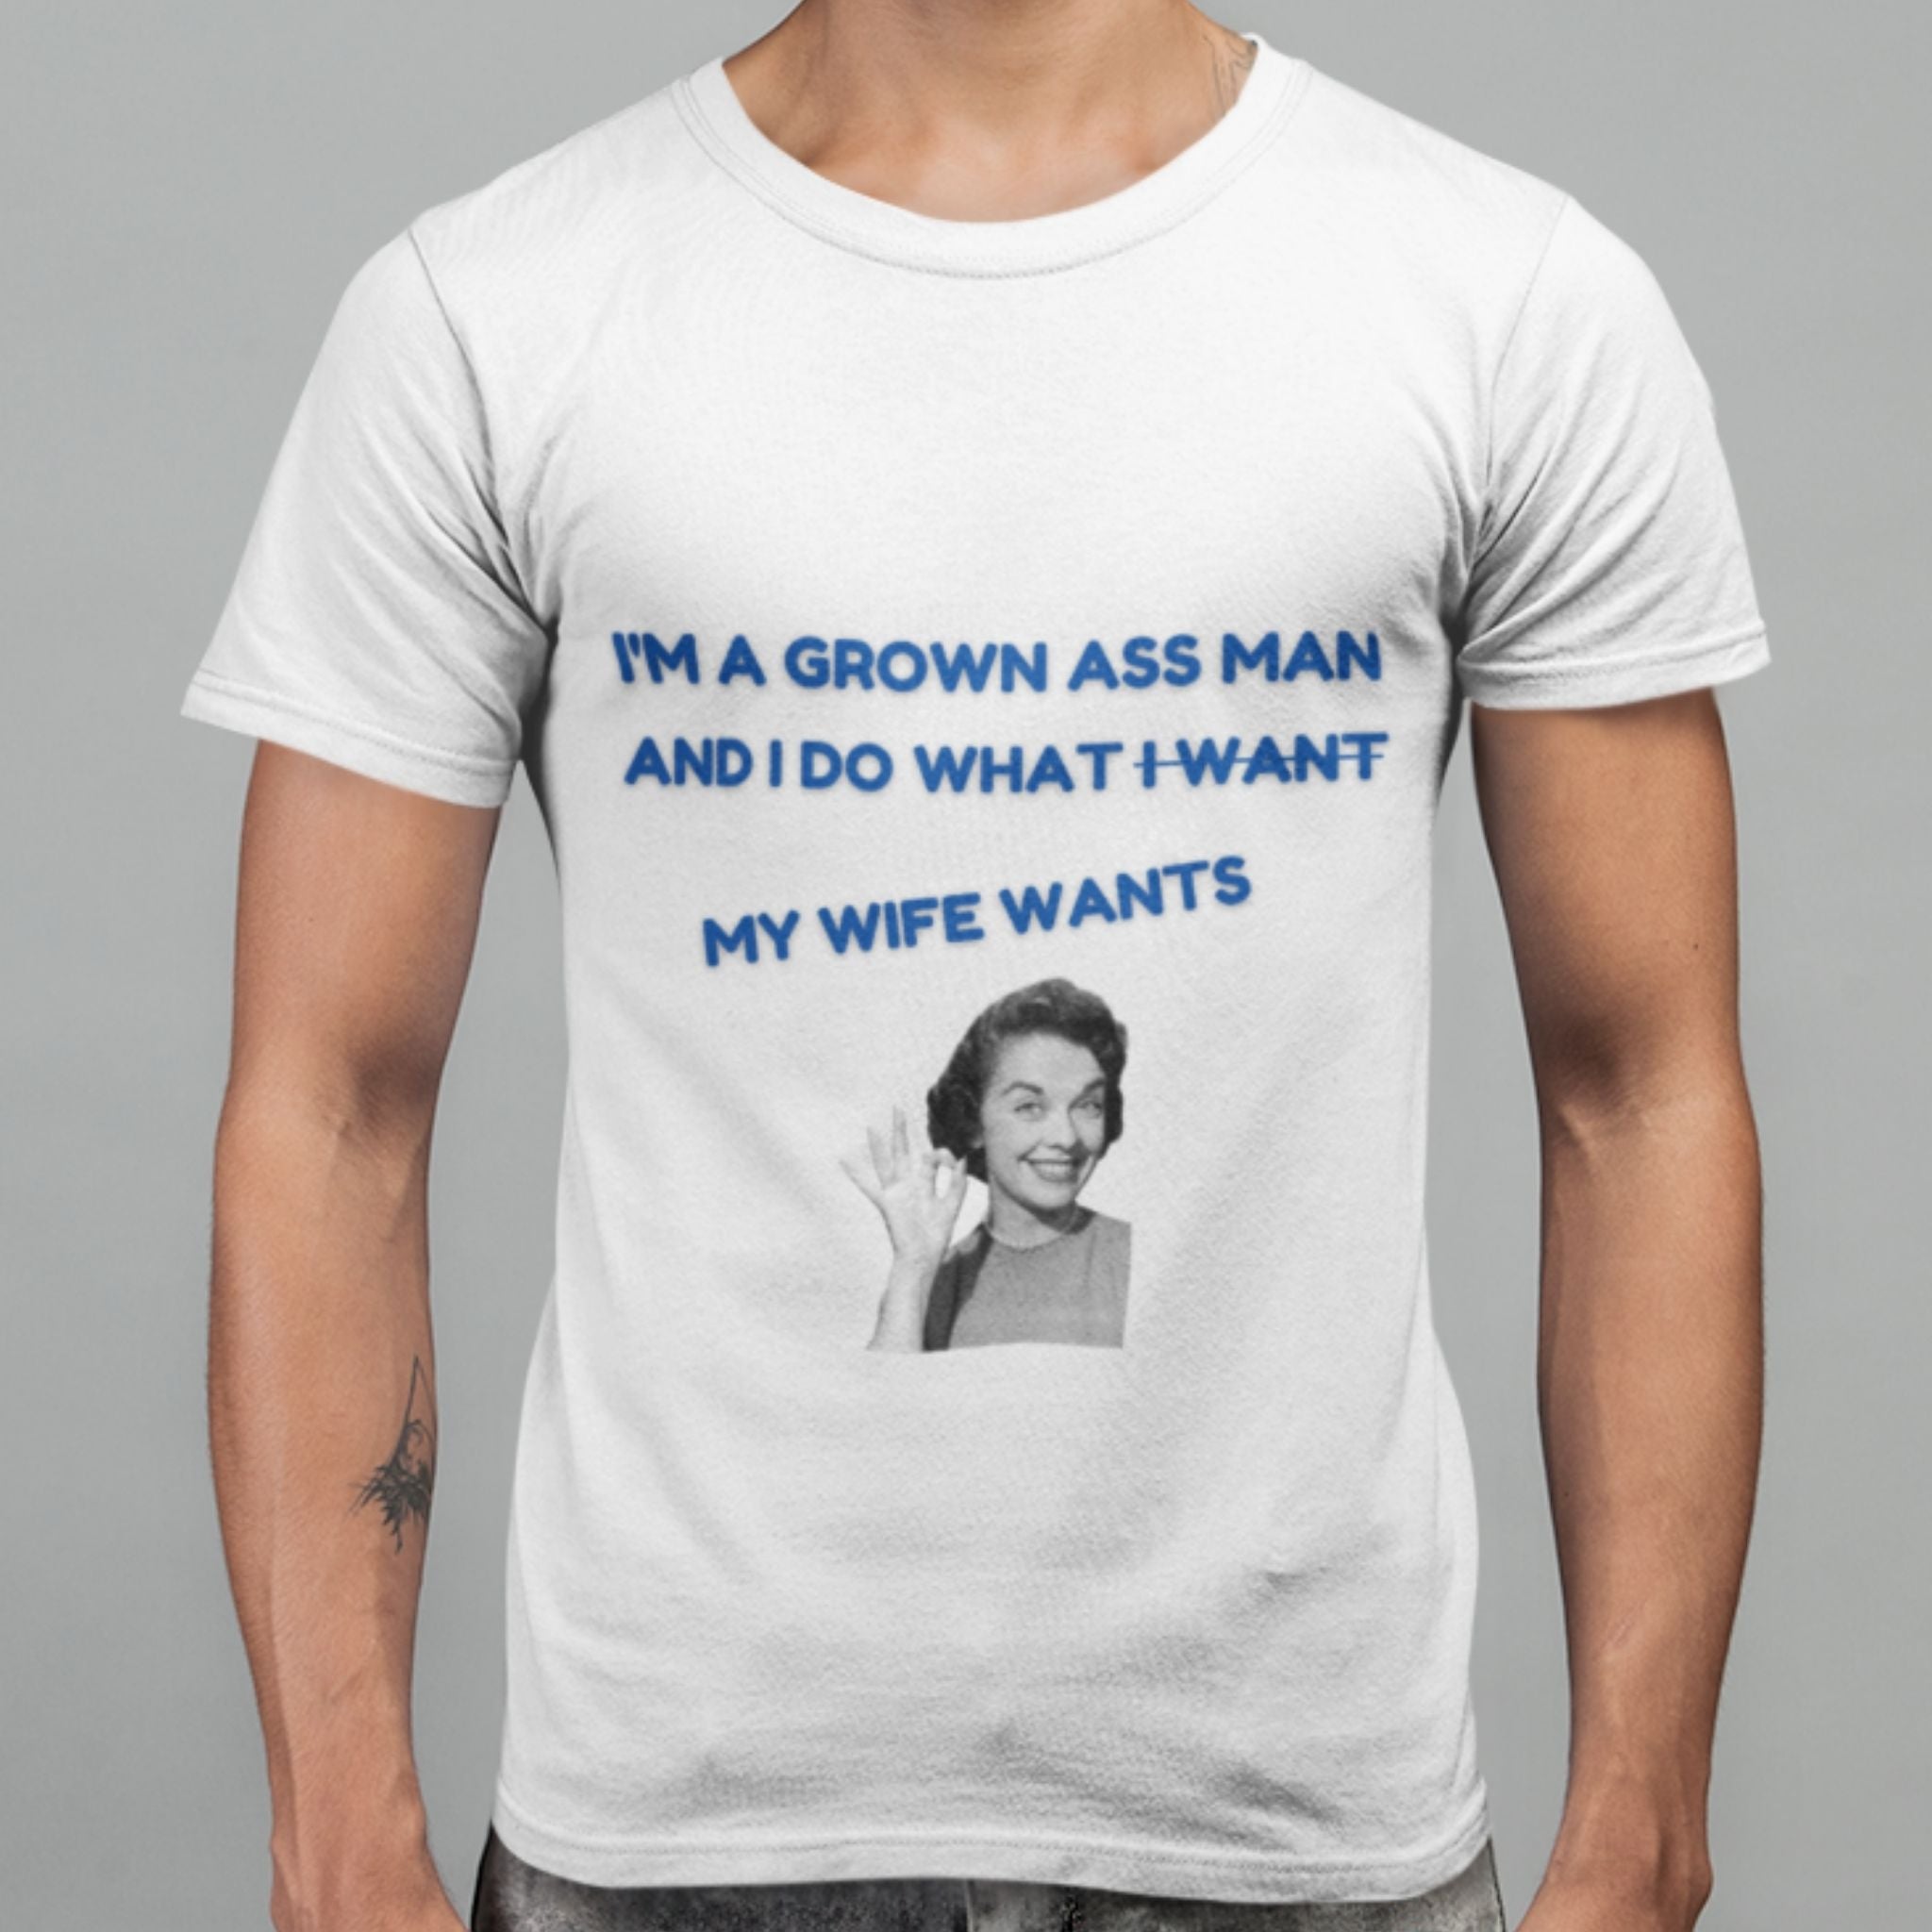 <img src=“birthday gift to husband.png” alt=“t shirt for gym”>